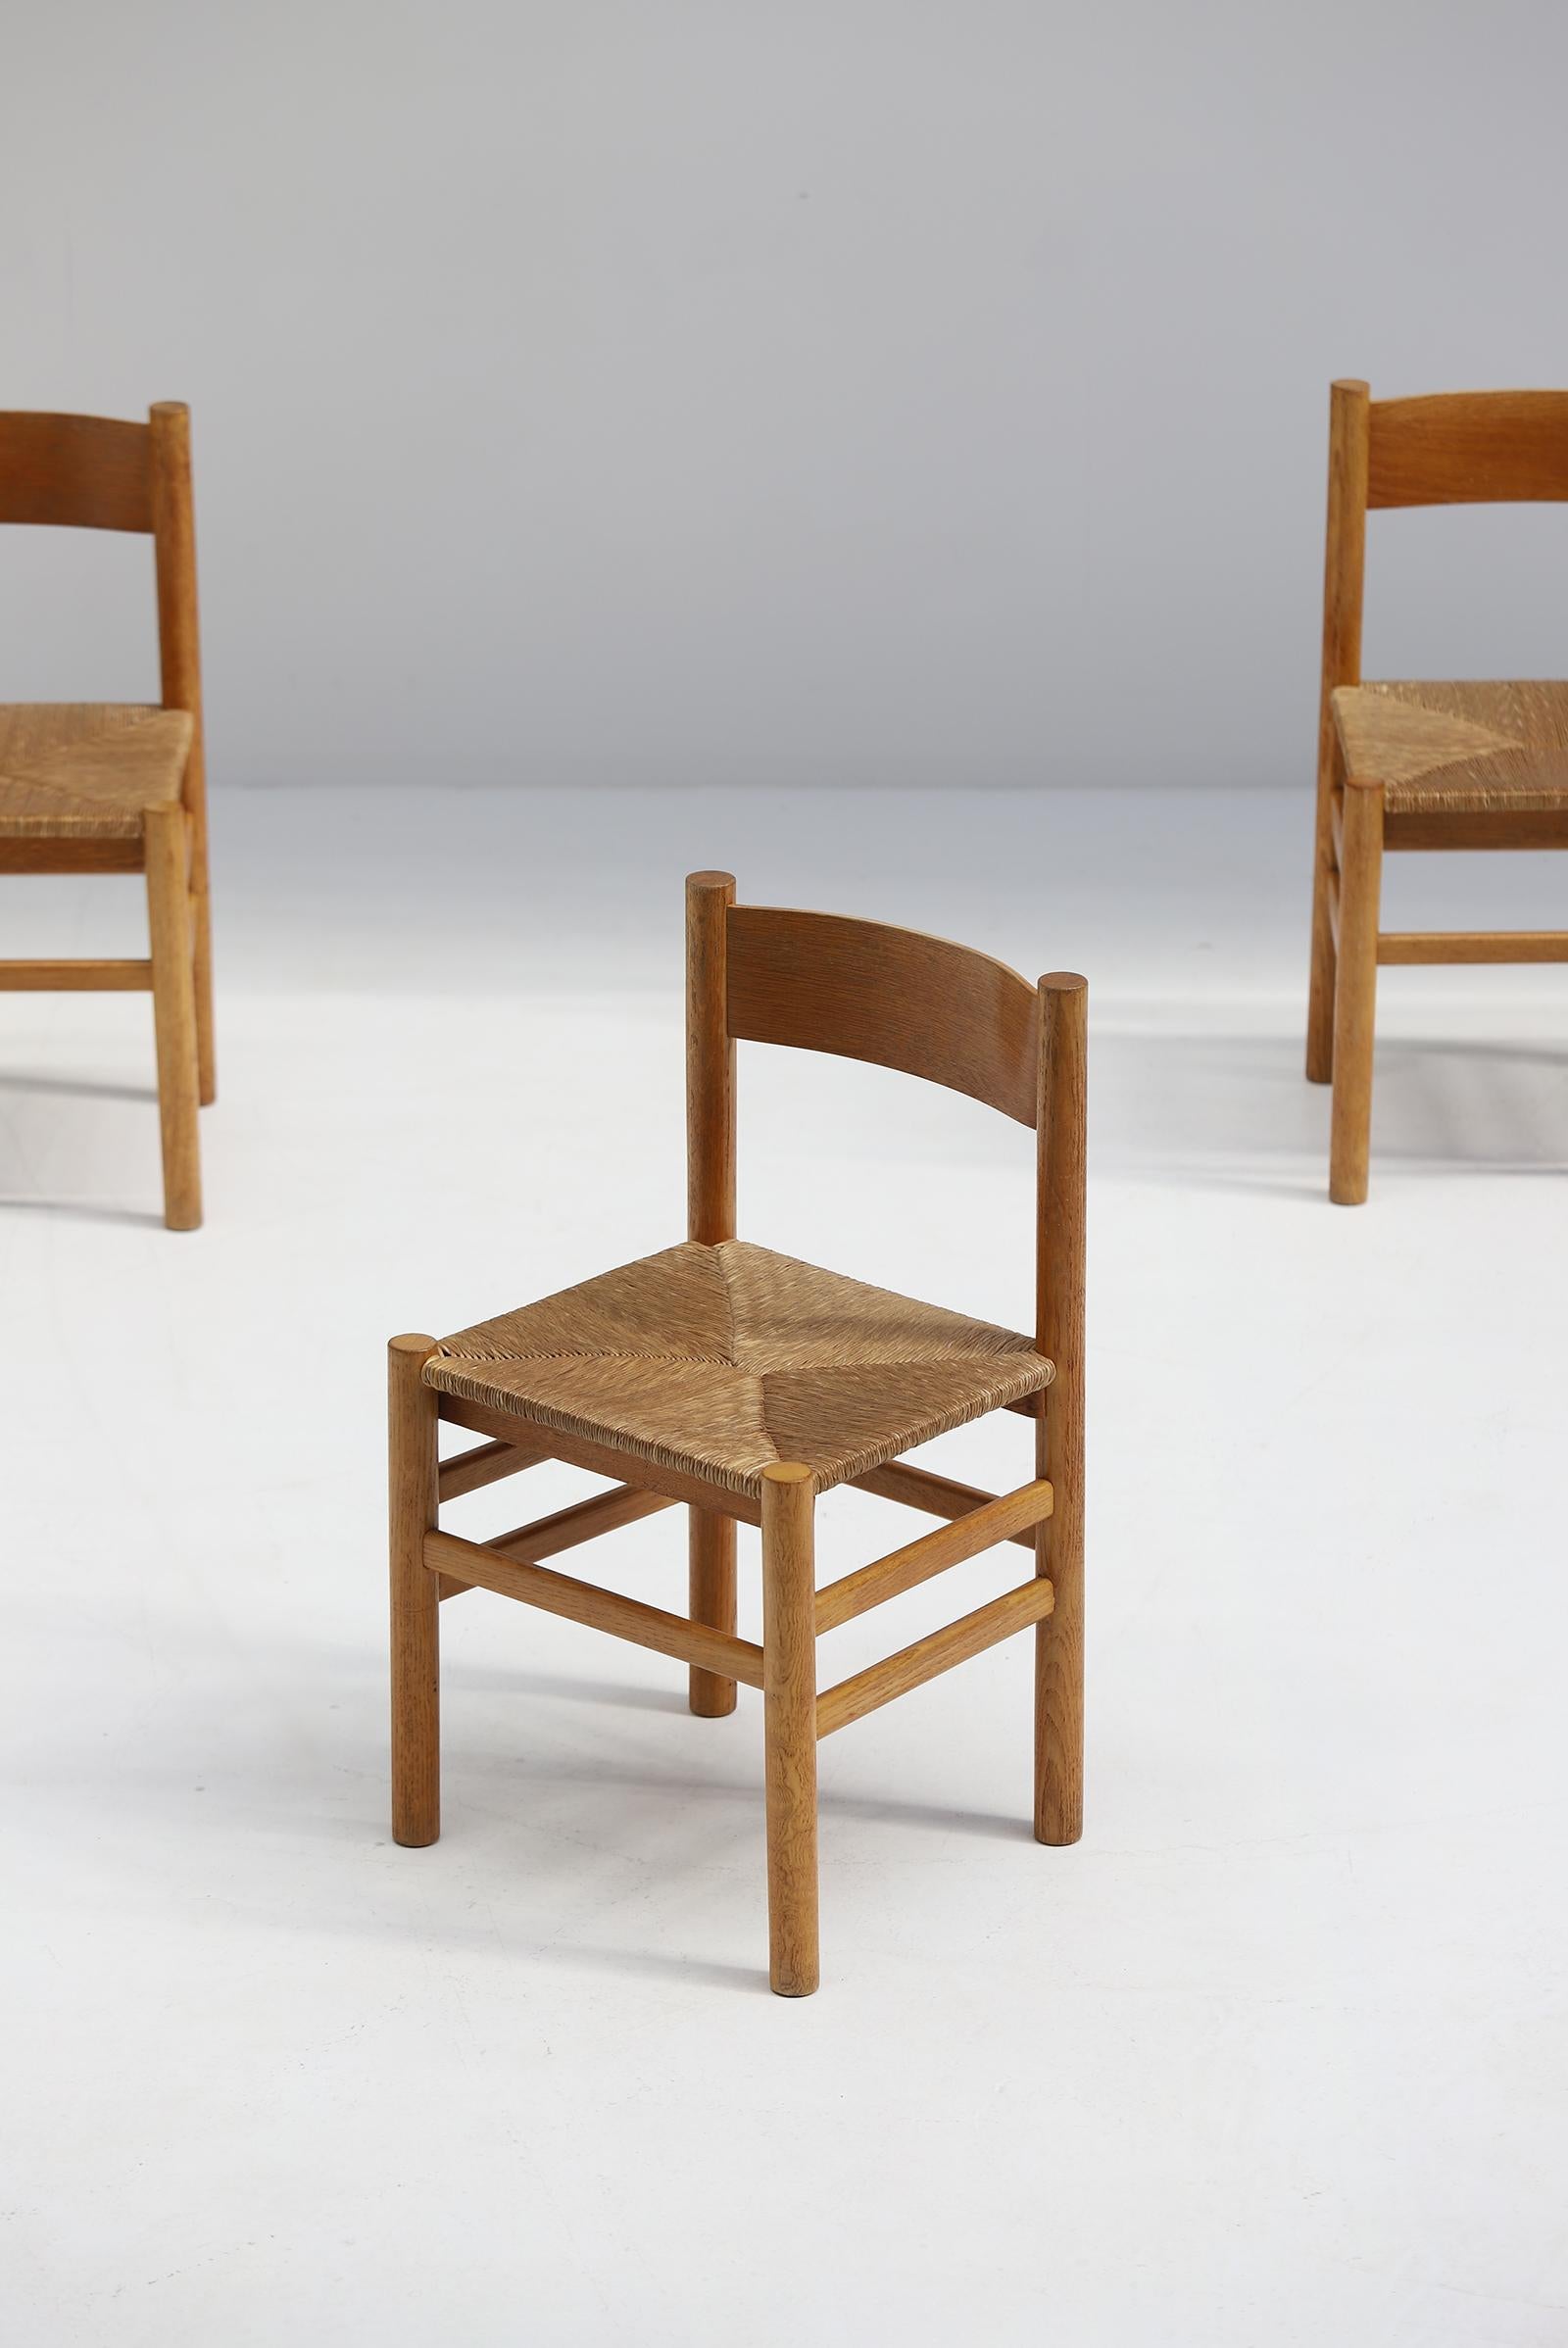 Unknown Set of 4 Modern Design wooden Dining Room Chairs with a Rush Seat